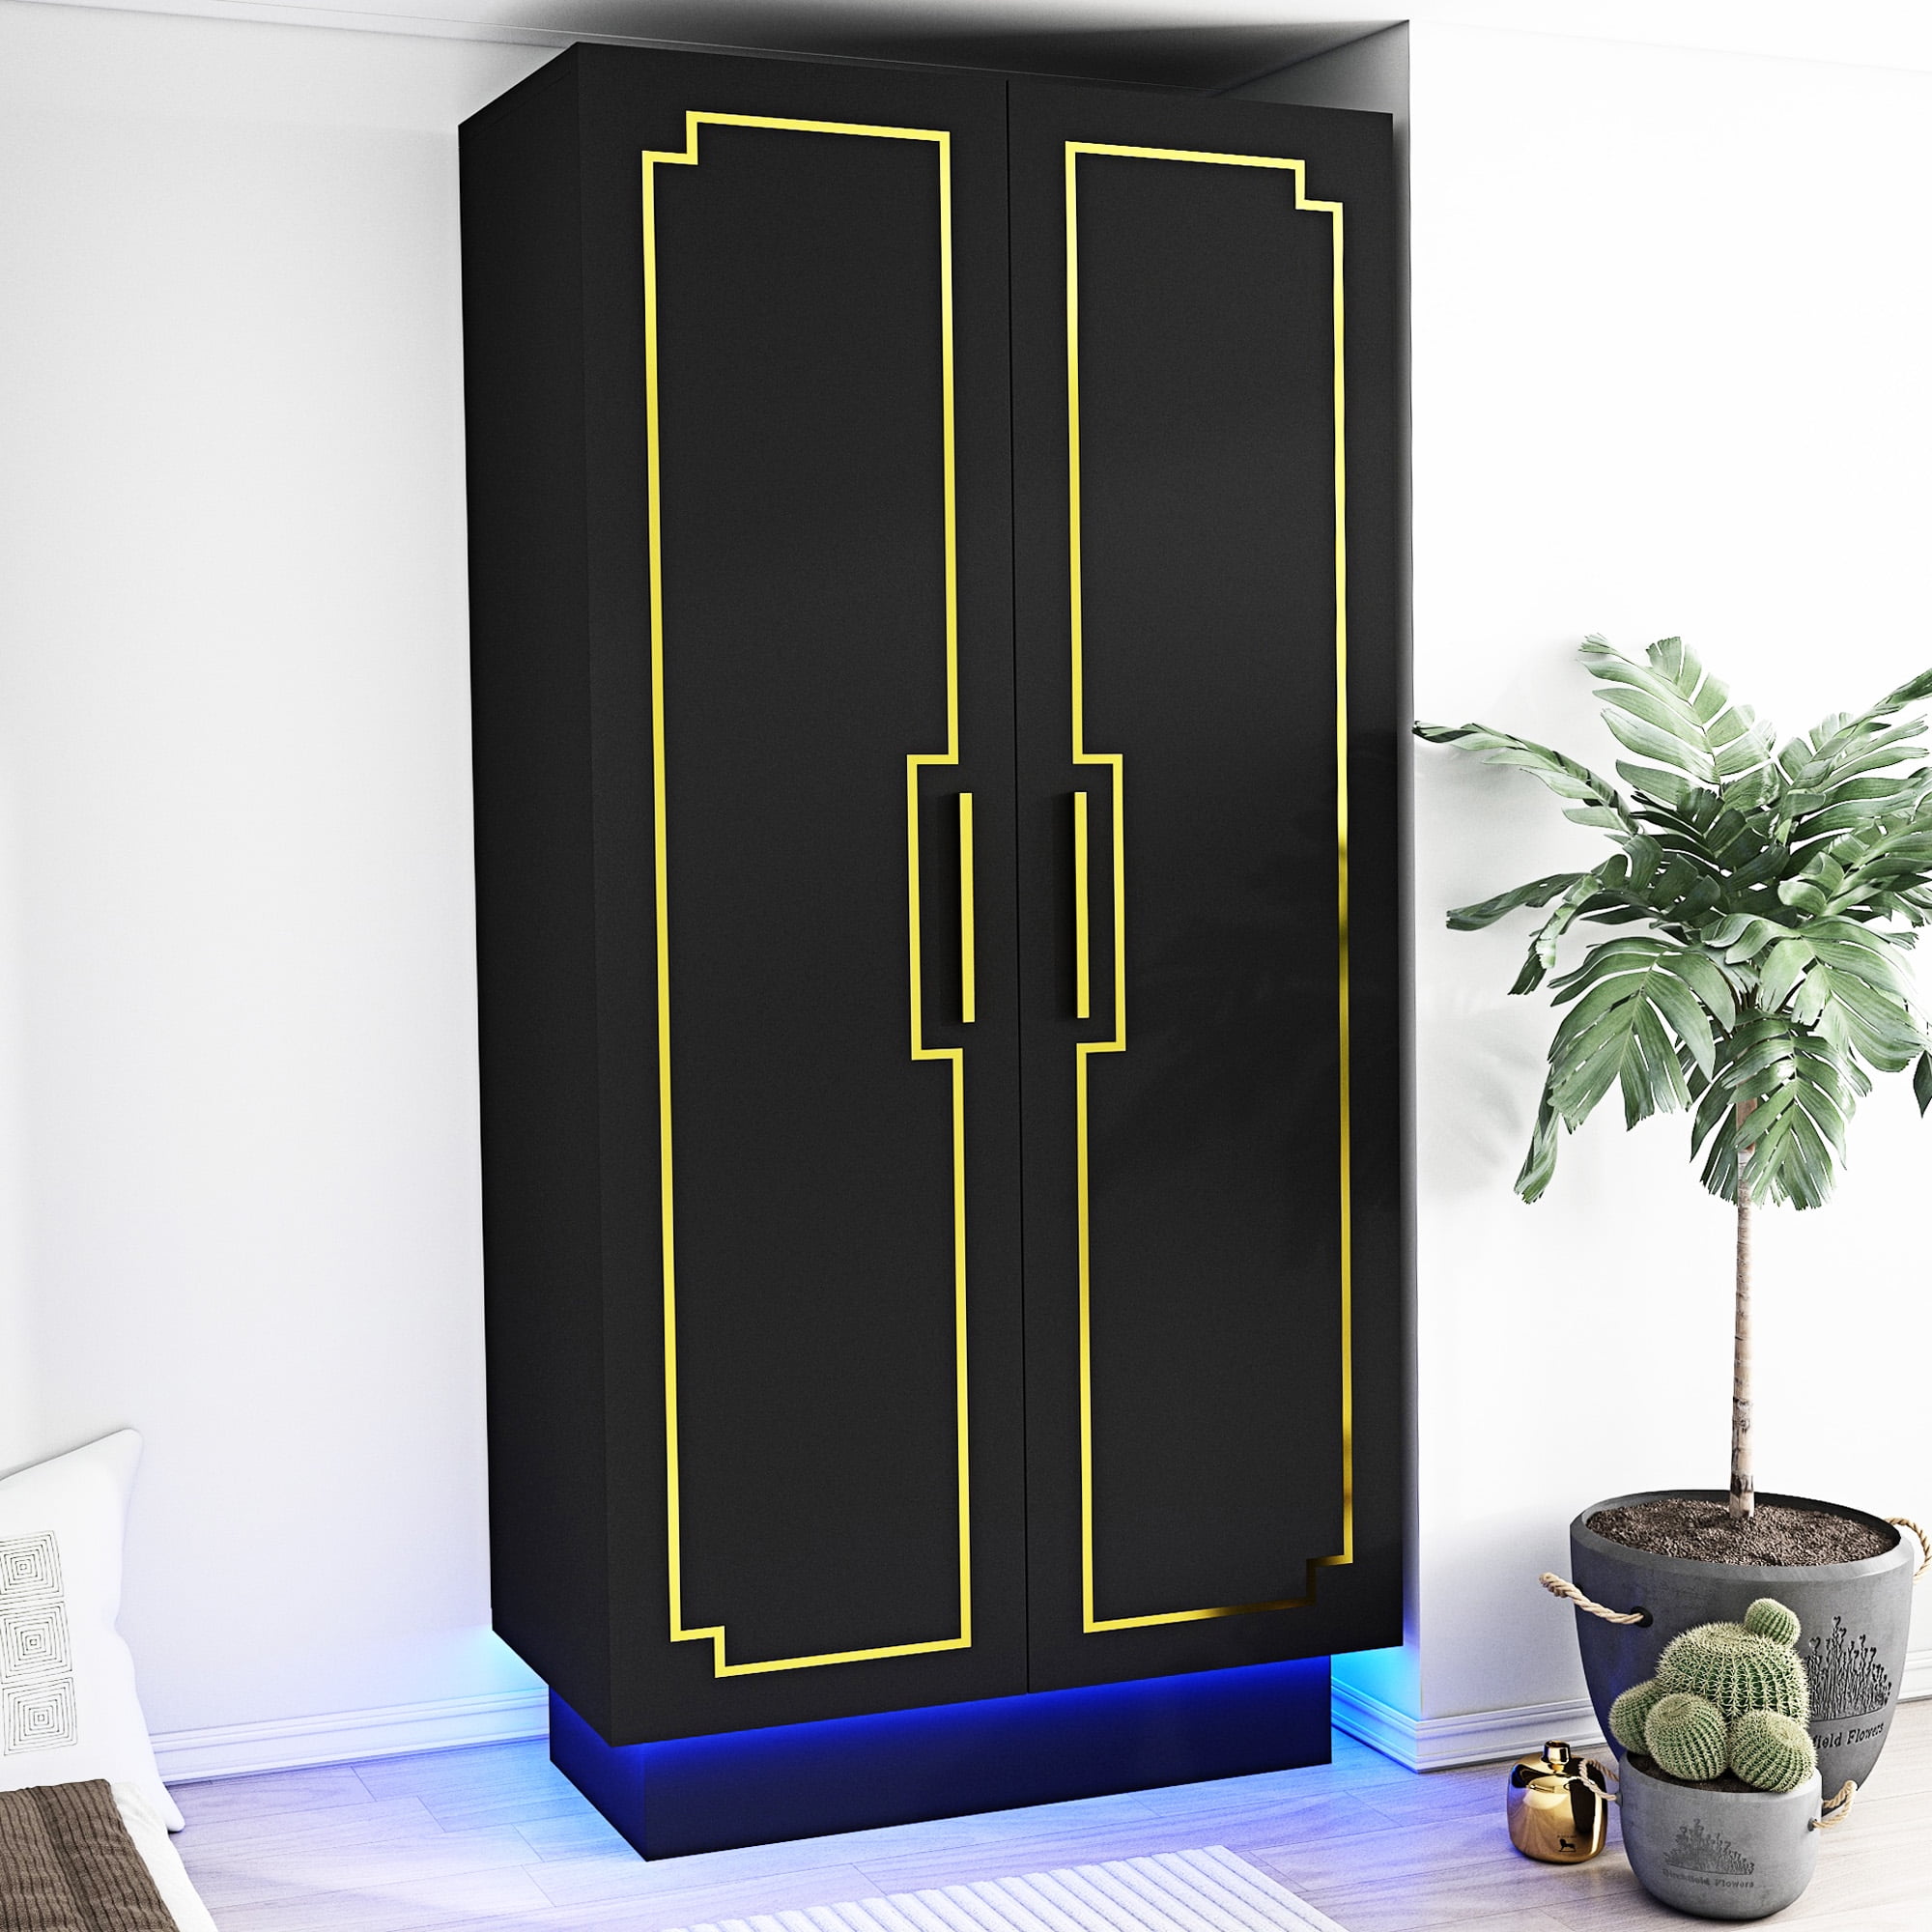  Hitow Wardrobe Armoire Closet with Glass Doors & LED Light  Strips, Wooden Large Display Cabinet with 5 Tiers Shelf & Hanging Rod,  Modern Bedroom Armoire Clothes Organizer, Black 47.2 W 